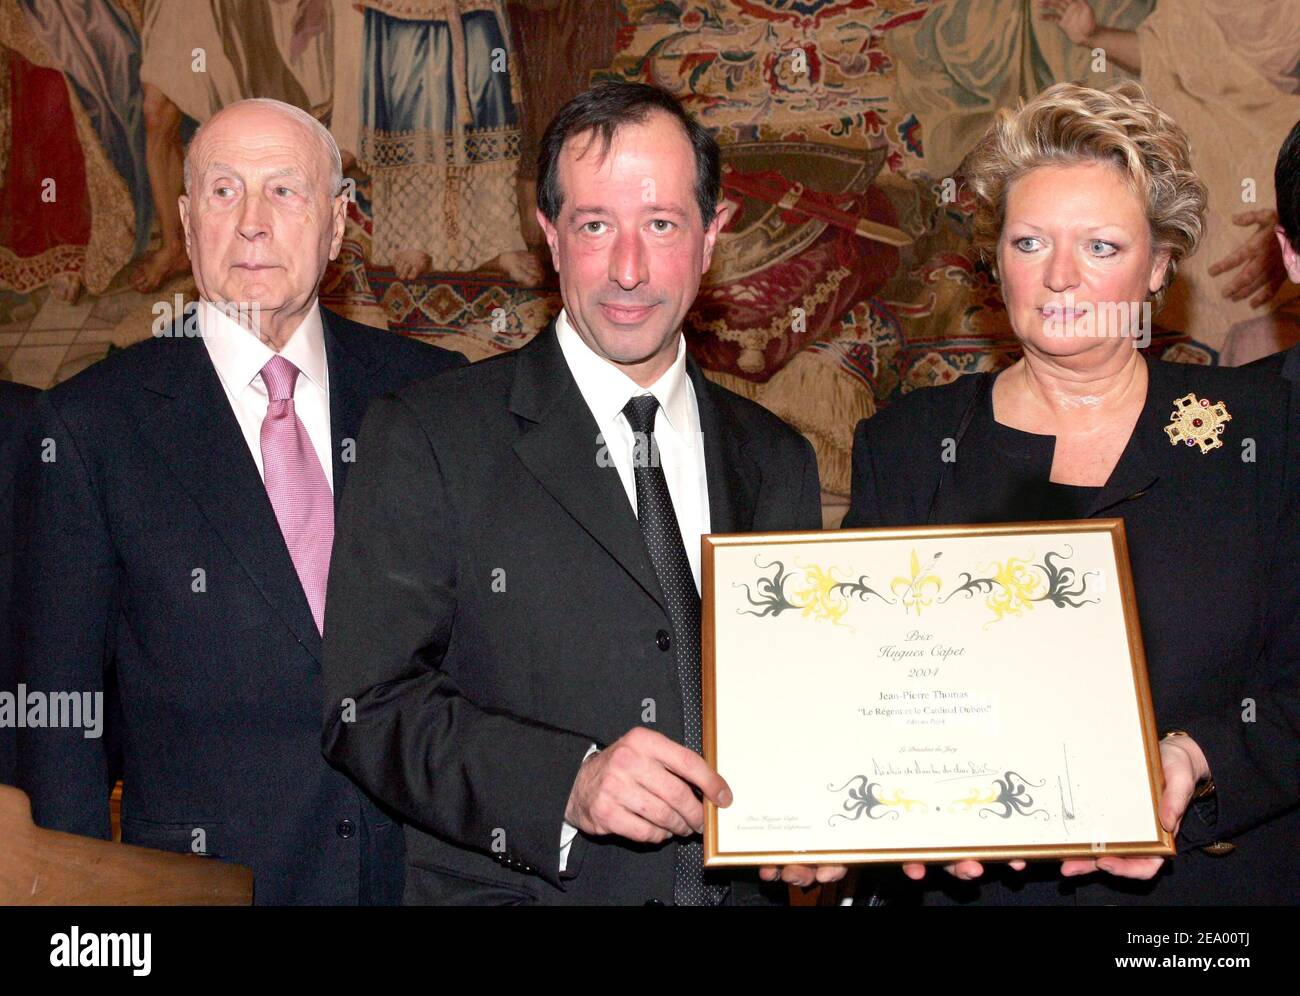 French historian Jean-Pierre Thomas (C) is awarded with the '2004 Hugues Capet Prize' from Pierre-Christian Taittinger and the Princess Beatrice de Bourbon des Deux Siciles for his book 'Le Regent et le Cardinal Dubois', during a ceremony held at the Cercle de l'Union Interalliee in Paris, France on February 7, 2005. Photo by Laurent Zabulon/ABACA. Stock Photo